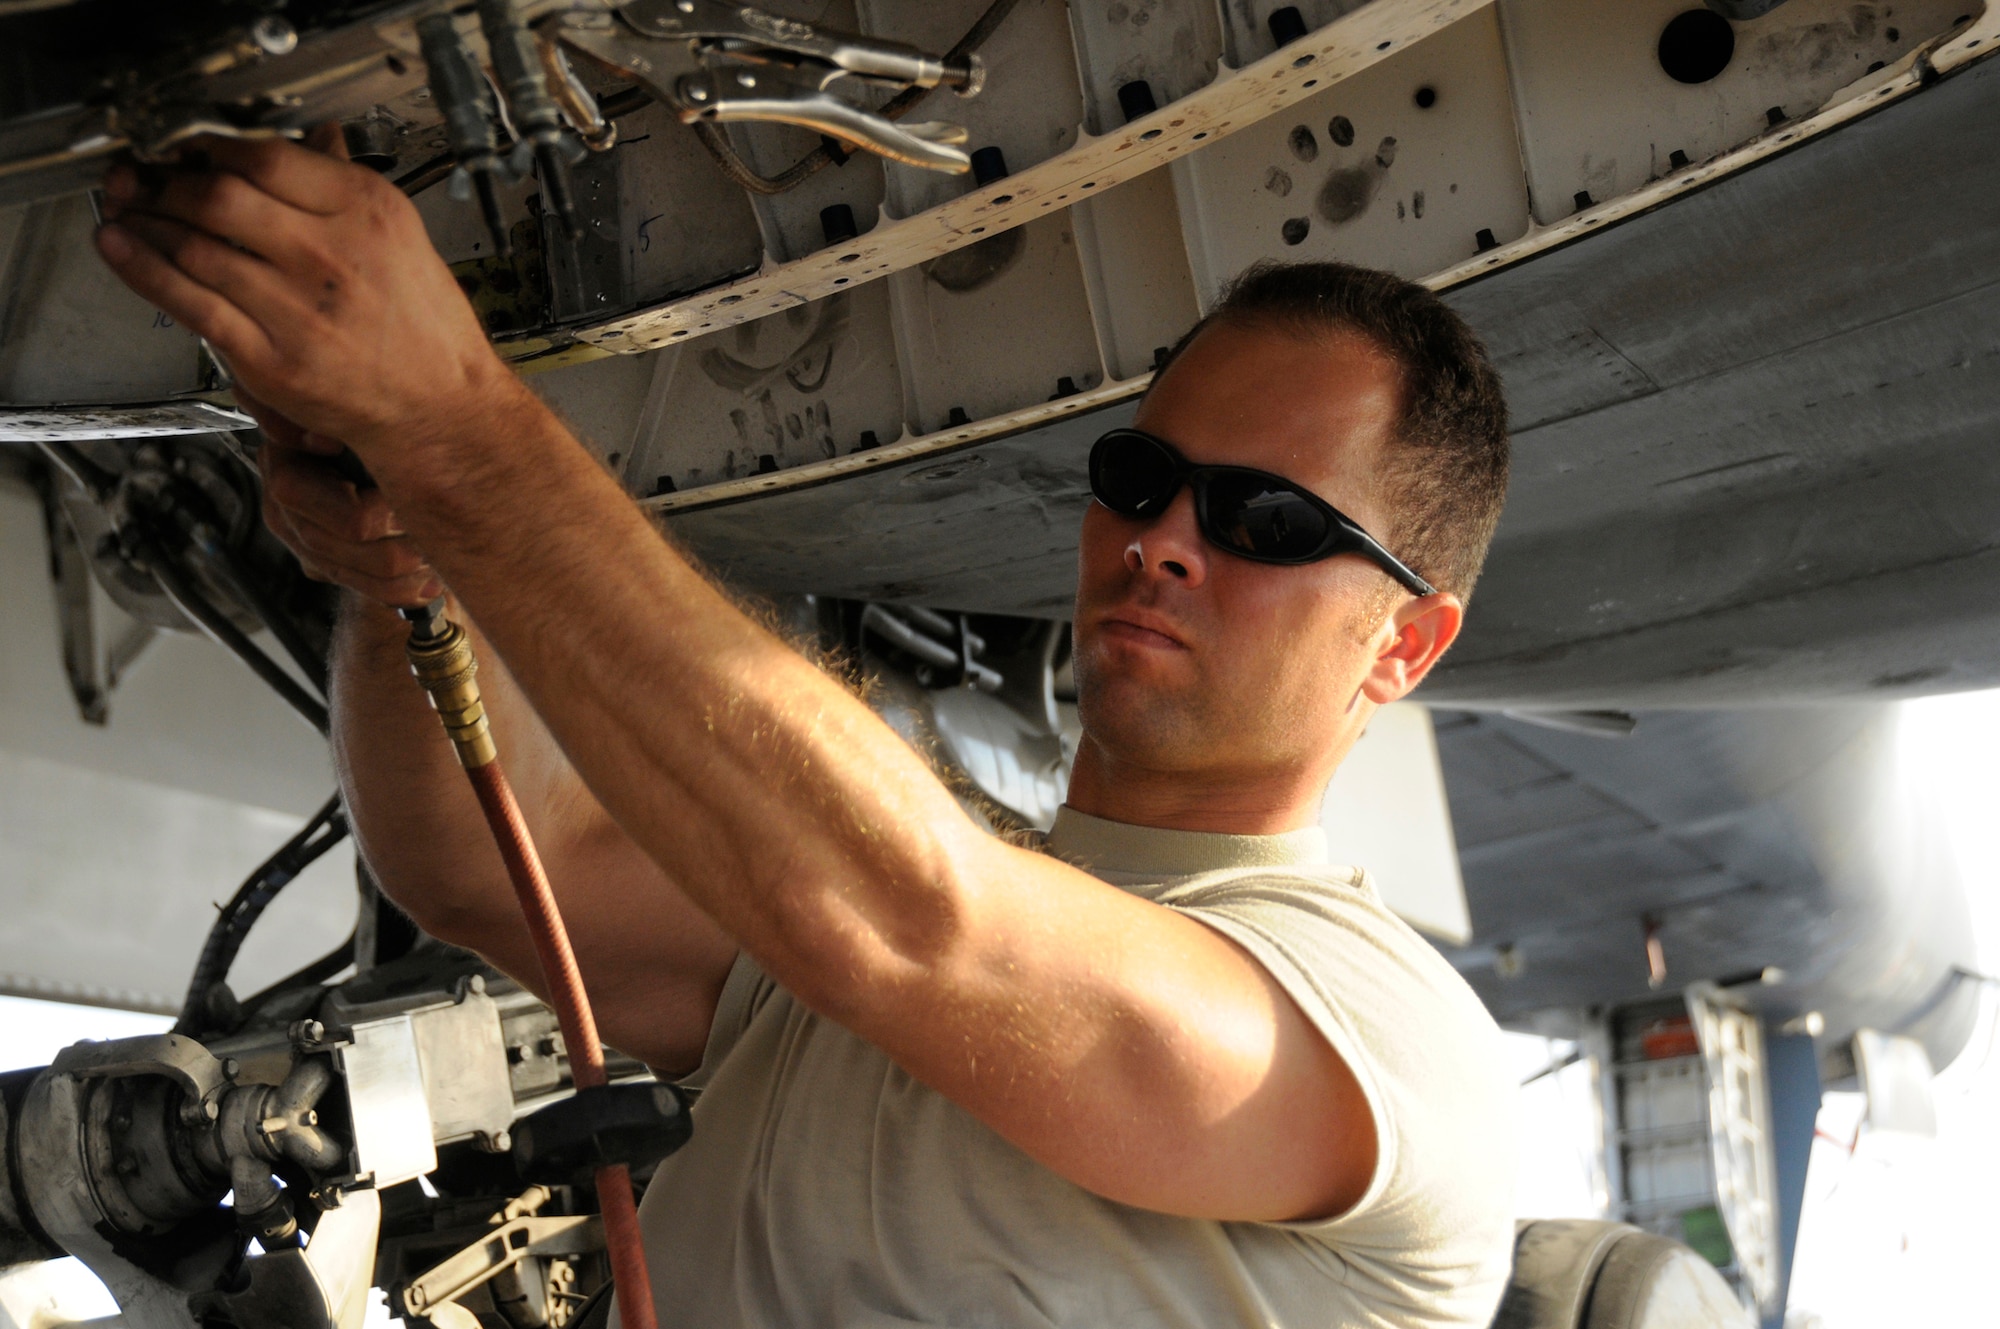 Tech. Sgt. Brian Hardwick, structural aircraft maintainer assigned to the 379th Expeditionary Maintenance Squadron, repairs the engine nacelle using an MC-2A air compressor Nov. 18, 2008, at an undisclosed air base in Southwest Asia. Sergeant Hardwick, a native of Santa Cruz, Calif., is deployed from Royal Air Force Mildenhall, U.K., in support of Operations Iraqi and Enduring Freedom and Joint Task Force-Horn of Africa. (U.S. Air Force photo by Staff Sgt. Darnell T. Cannady/Released)